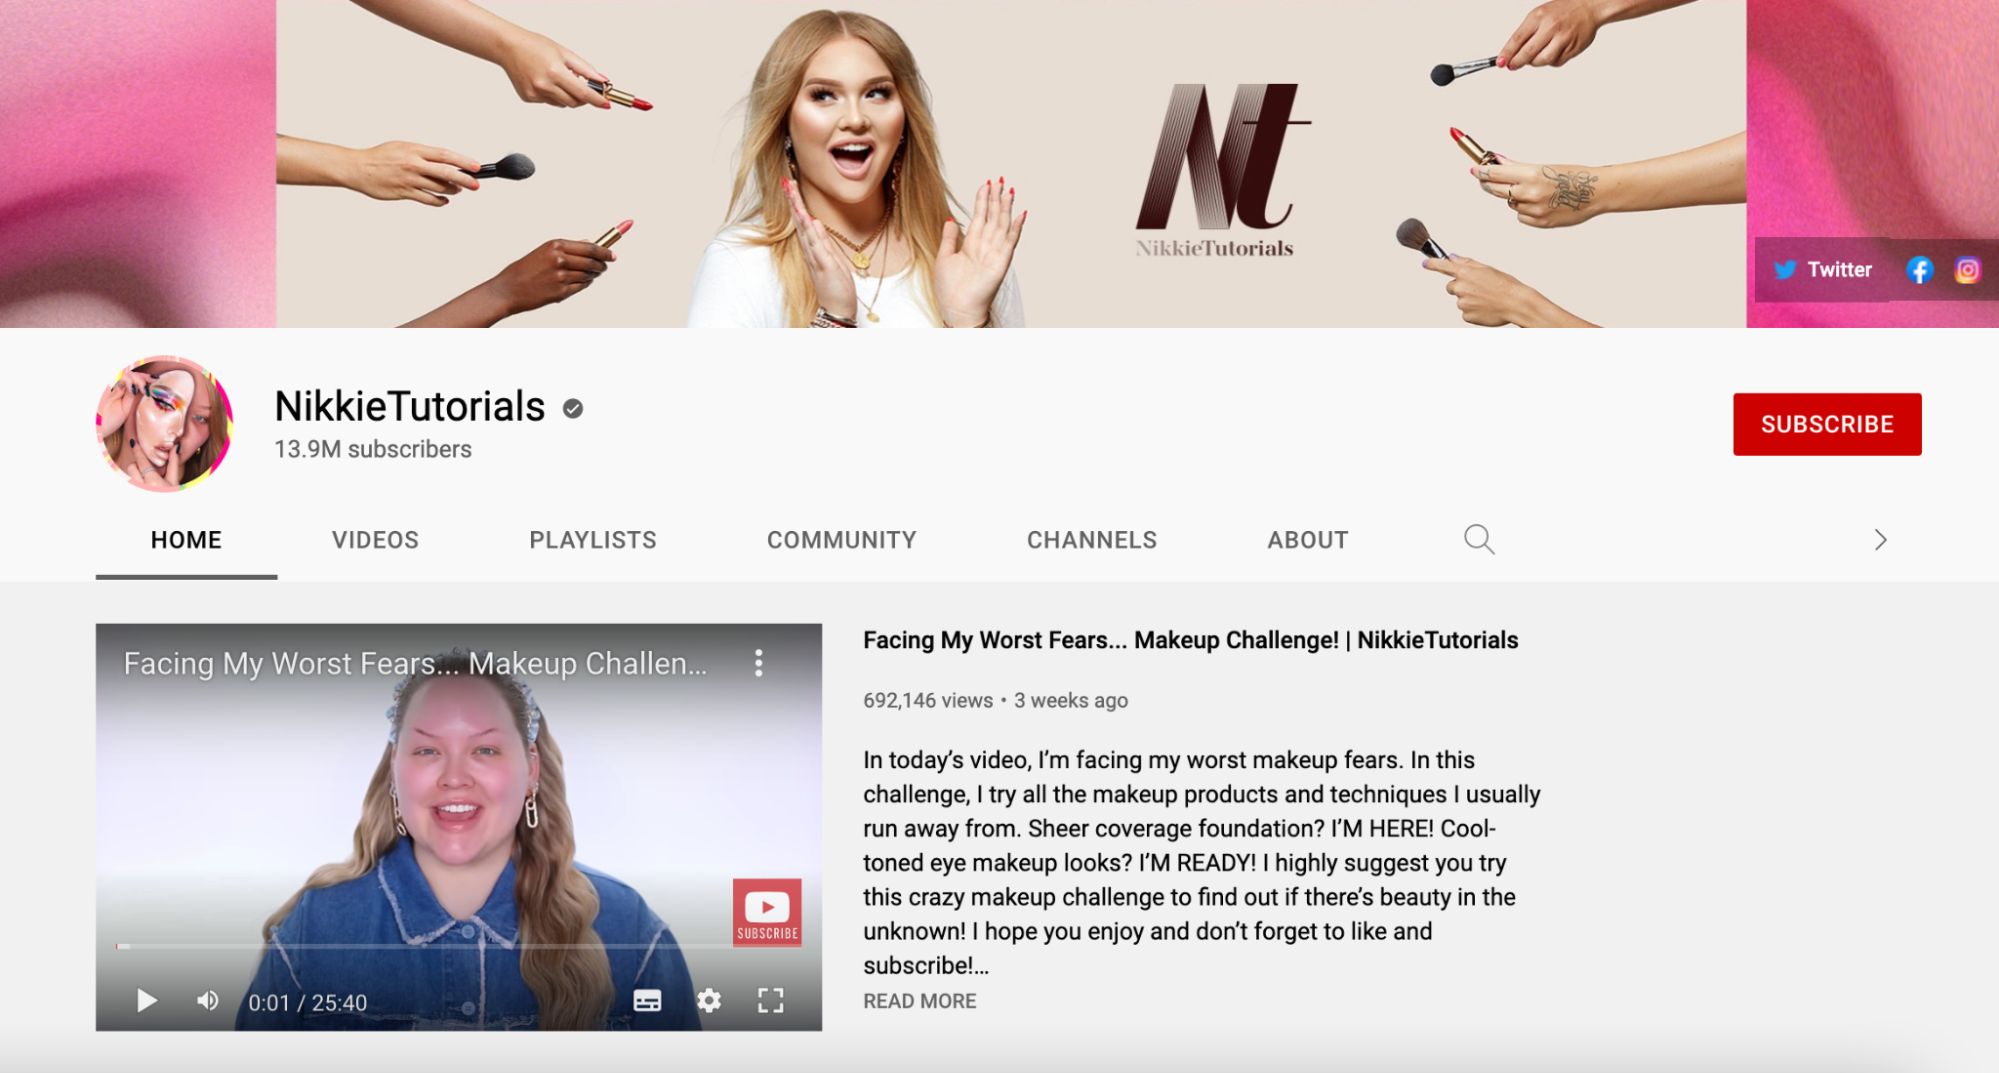 YouTube profile of the influencer NikkiTutorials